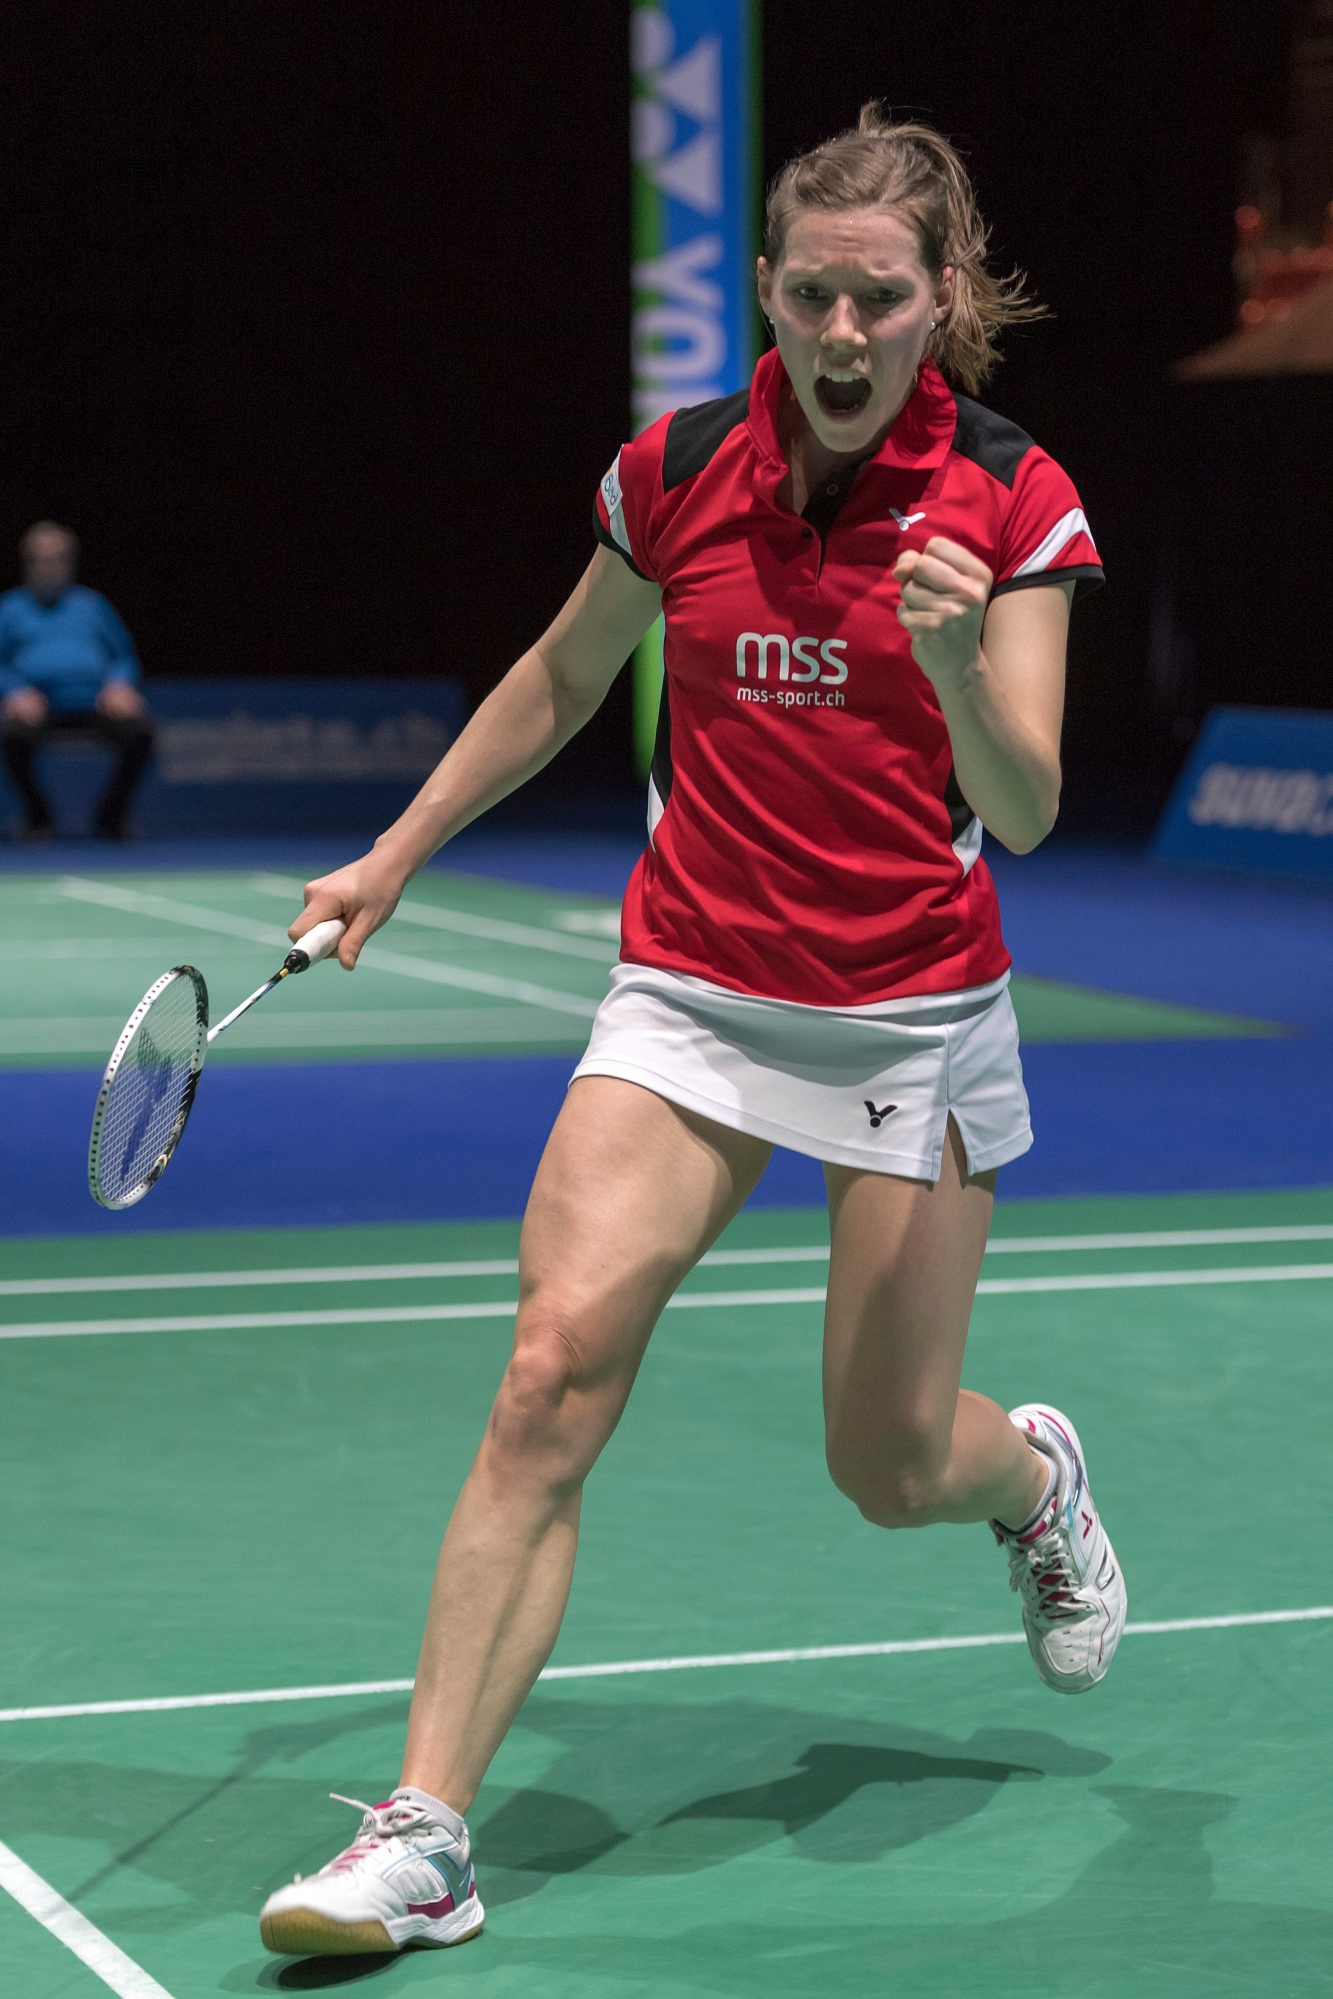 Sabrina Jaquet reacts during her women's singles round of sixteen match against China's Chen Yufei at the Badminton Swiss Open tournament in the St. Jakobshalle in Basel, Switzerland, on Thursday, March 16, 2017. (KEYSTONE/Georgios Kefalas) SWITZERLAND BADMINTON SWISS OPEN